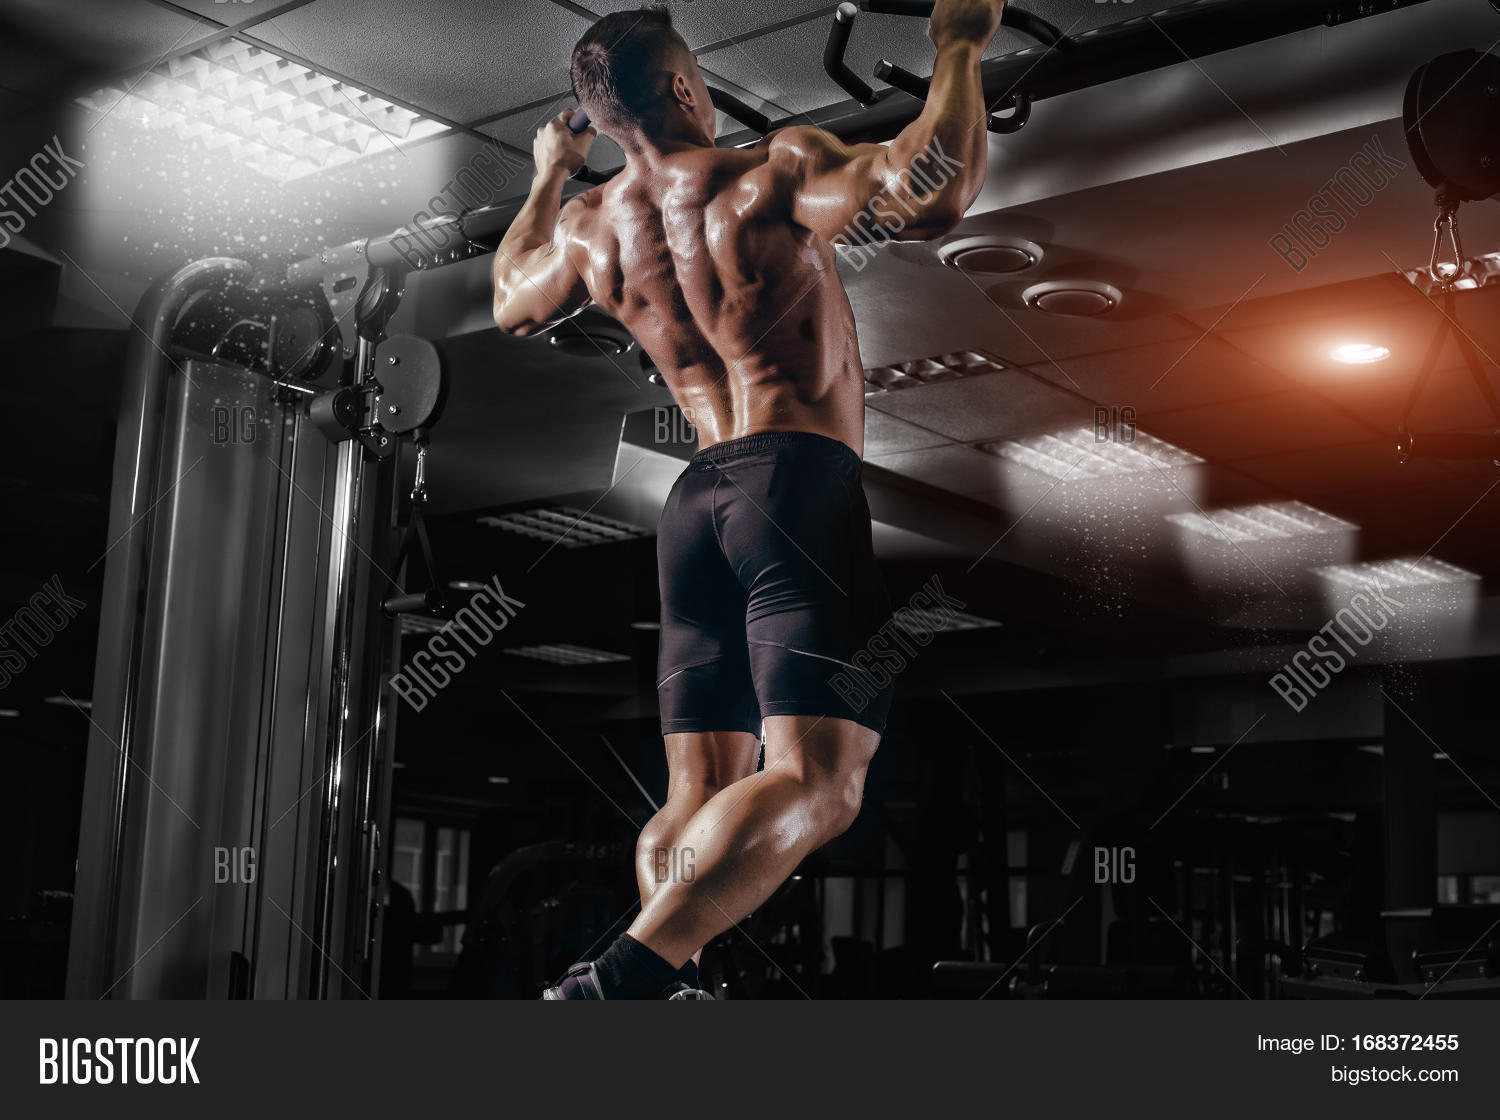 Muscle Athlete Man Gym Image & Photo (Free Trial)